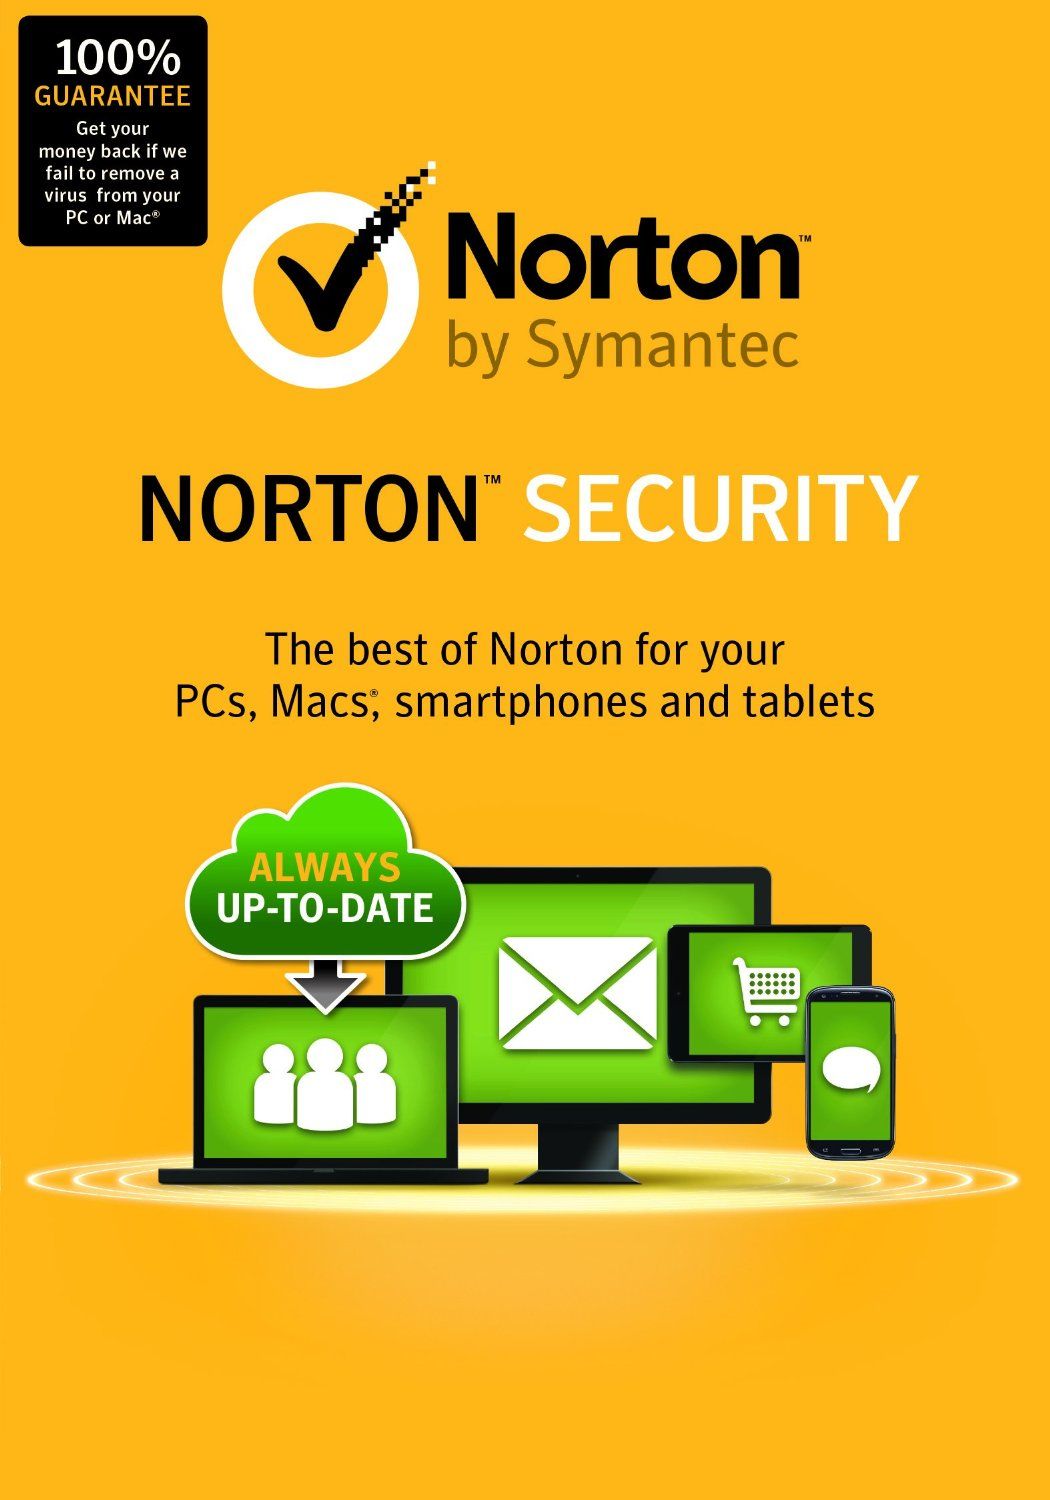 Norton Security Standard, Deluxe, and Premium Software on Perfection